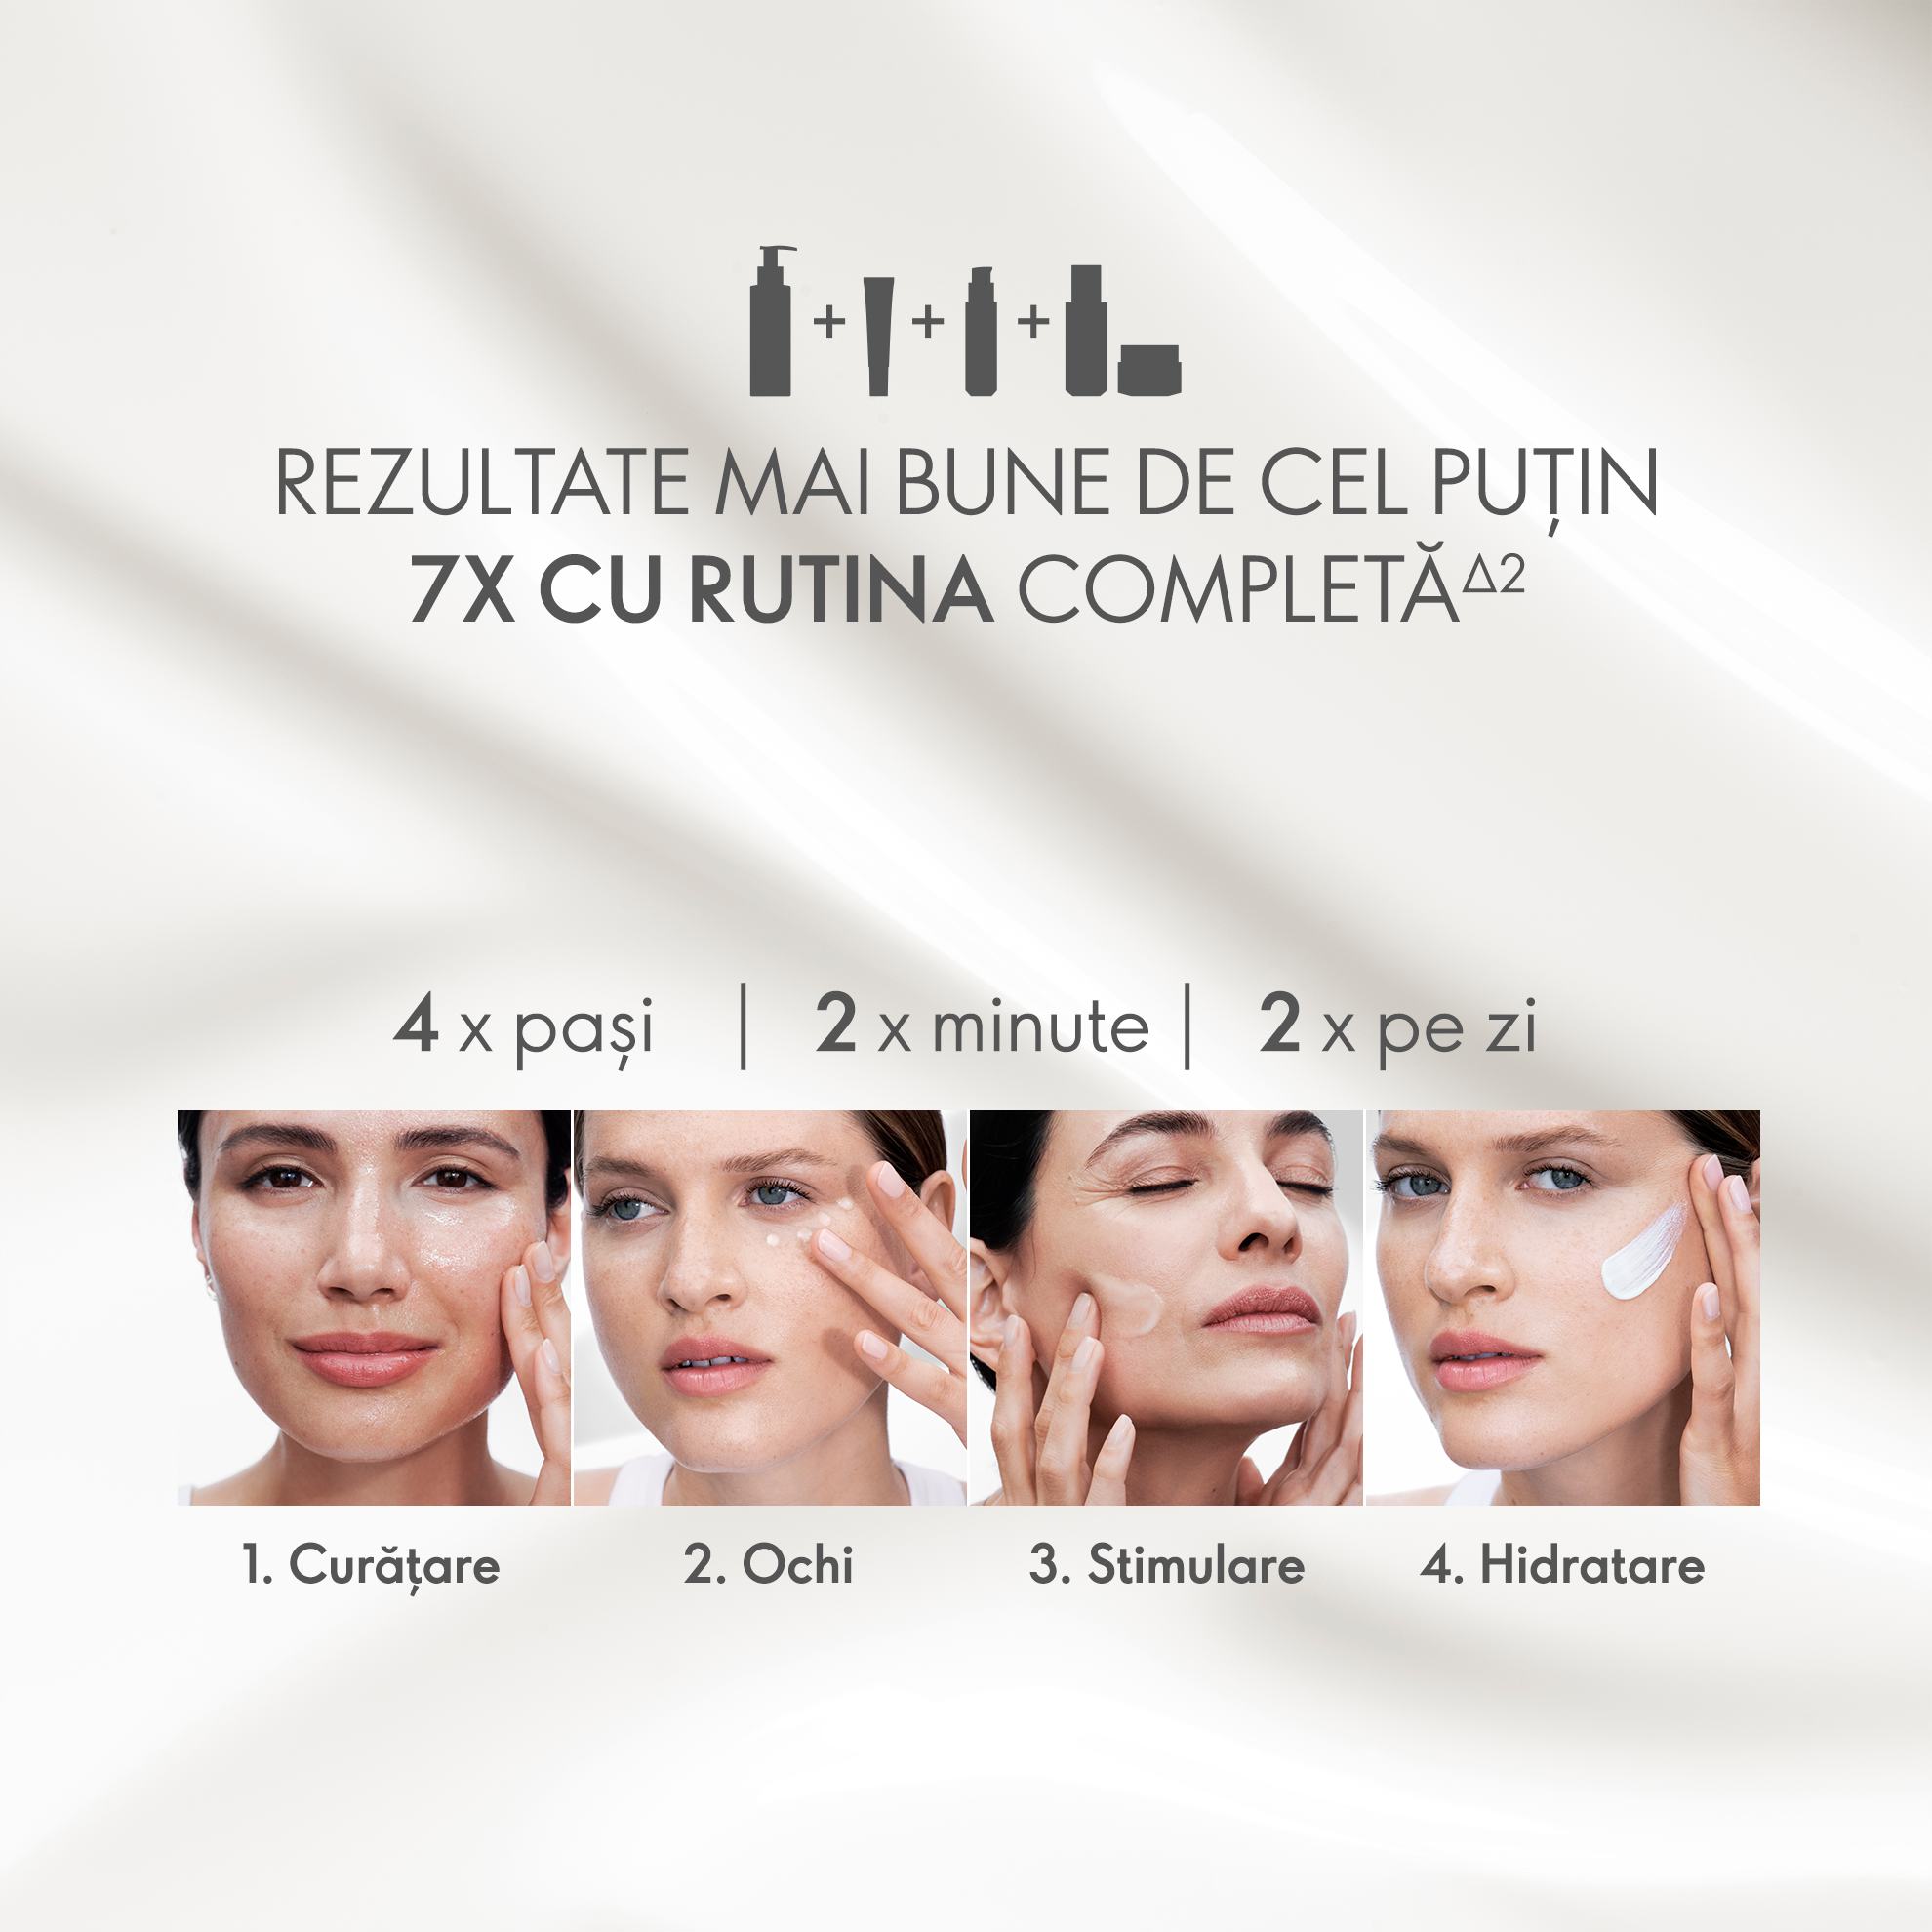 https://media-cdn.oriflame.com/productImage?externalMediaId=product-management-media%2fProducts%2f43691%2fMD%2f43691_5.png&id=17668406&version=1